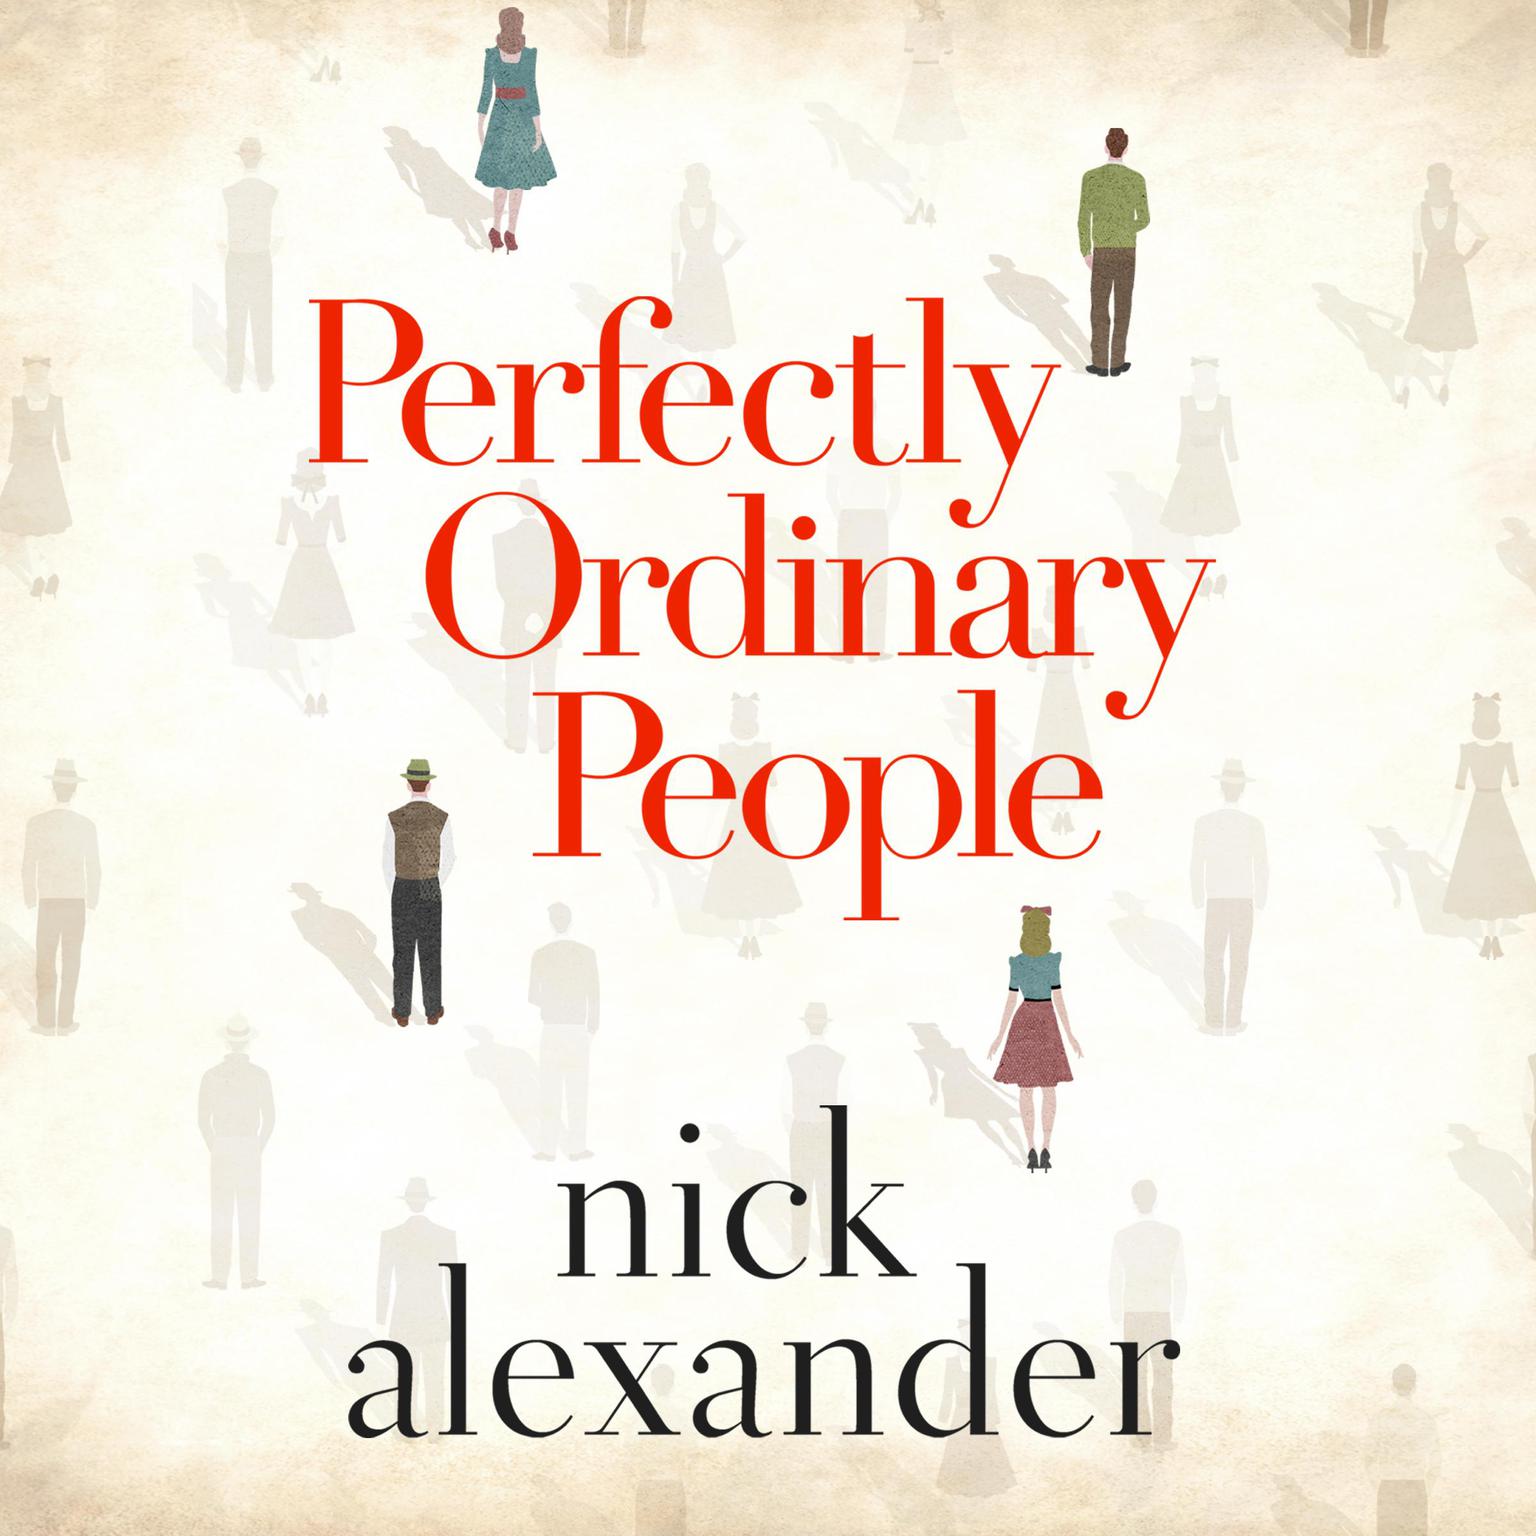 Perfectly Ordinary People Audiobook, by Nick Alexander